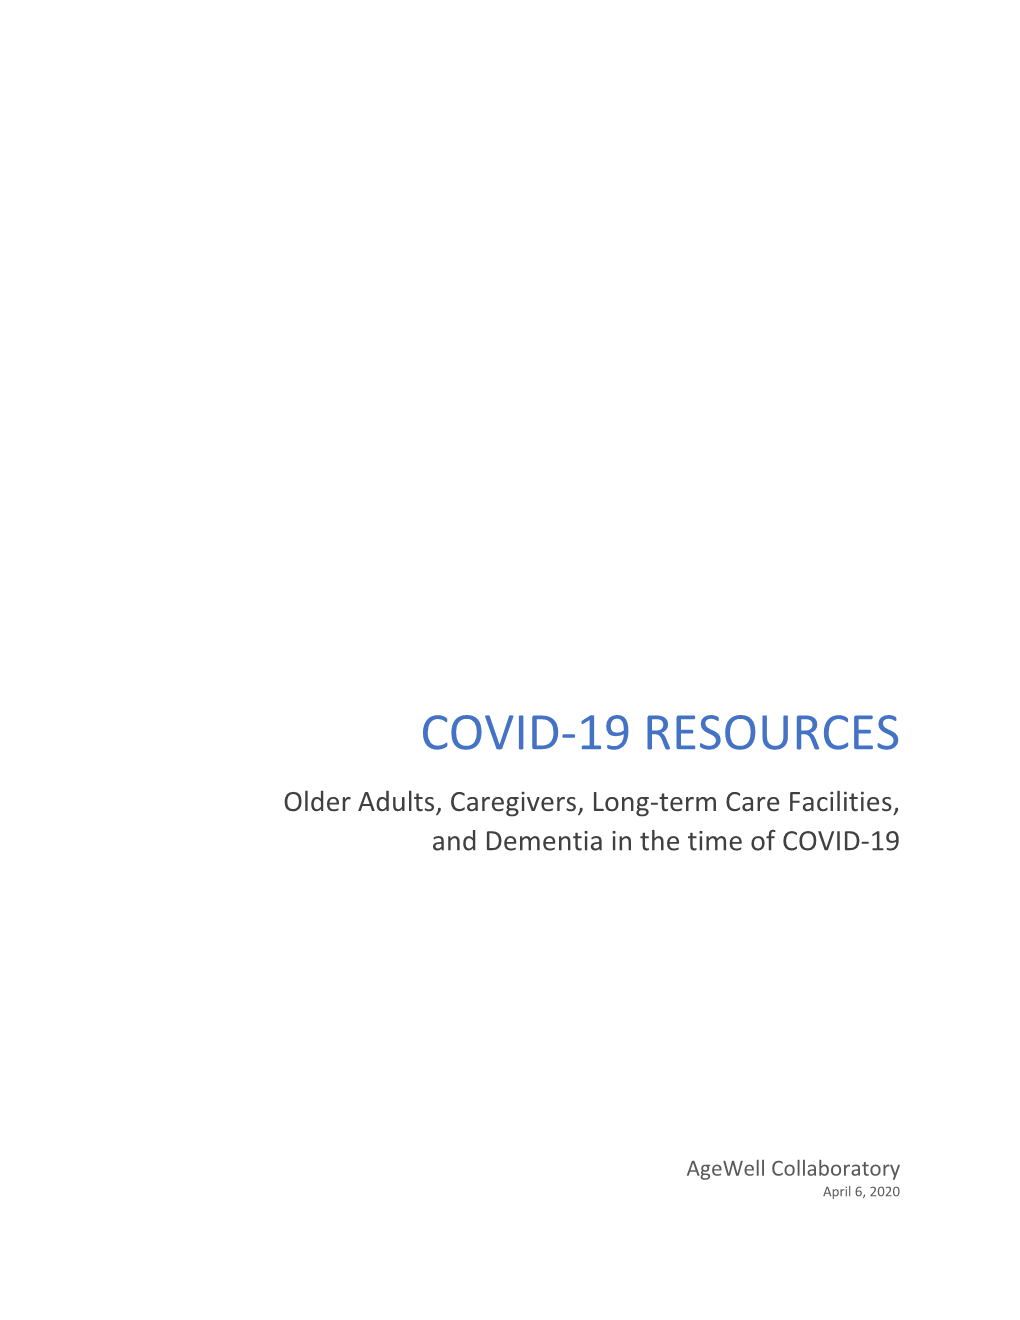 COVID-19 Resources- Agewell Collaboratory 4.7.2020.Pdf